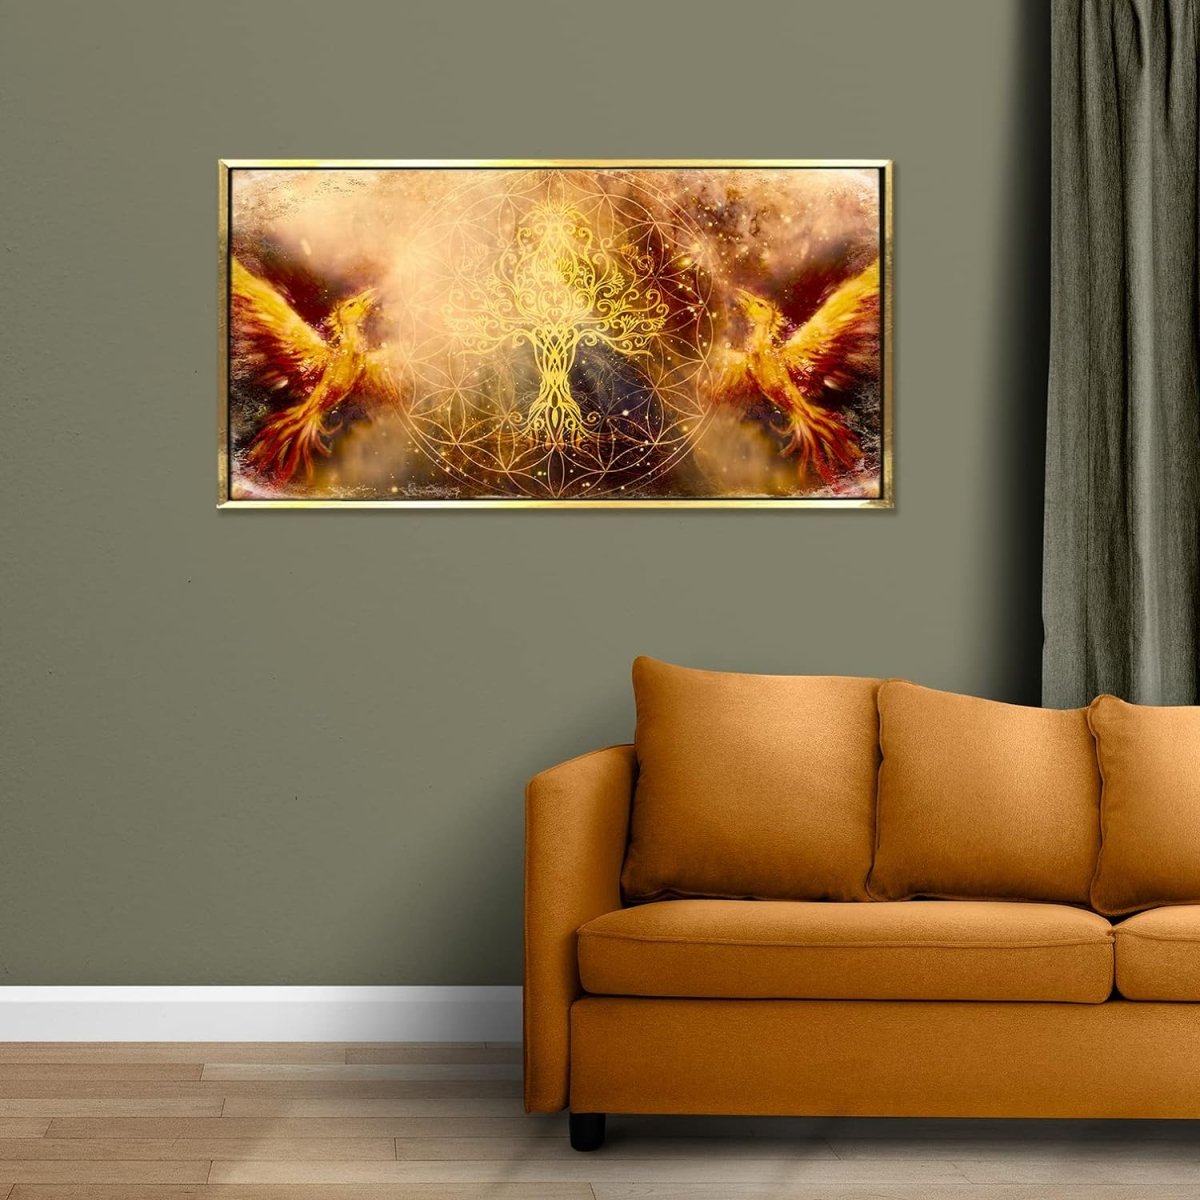 Ashes to Rebirth phoenix Framed Canvas Art (36 x 18 Inches)